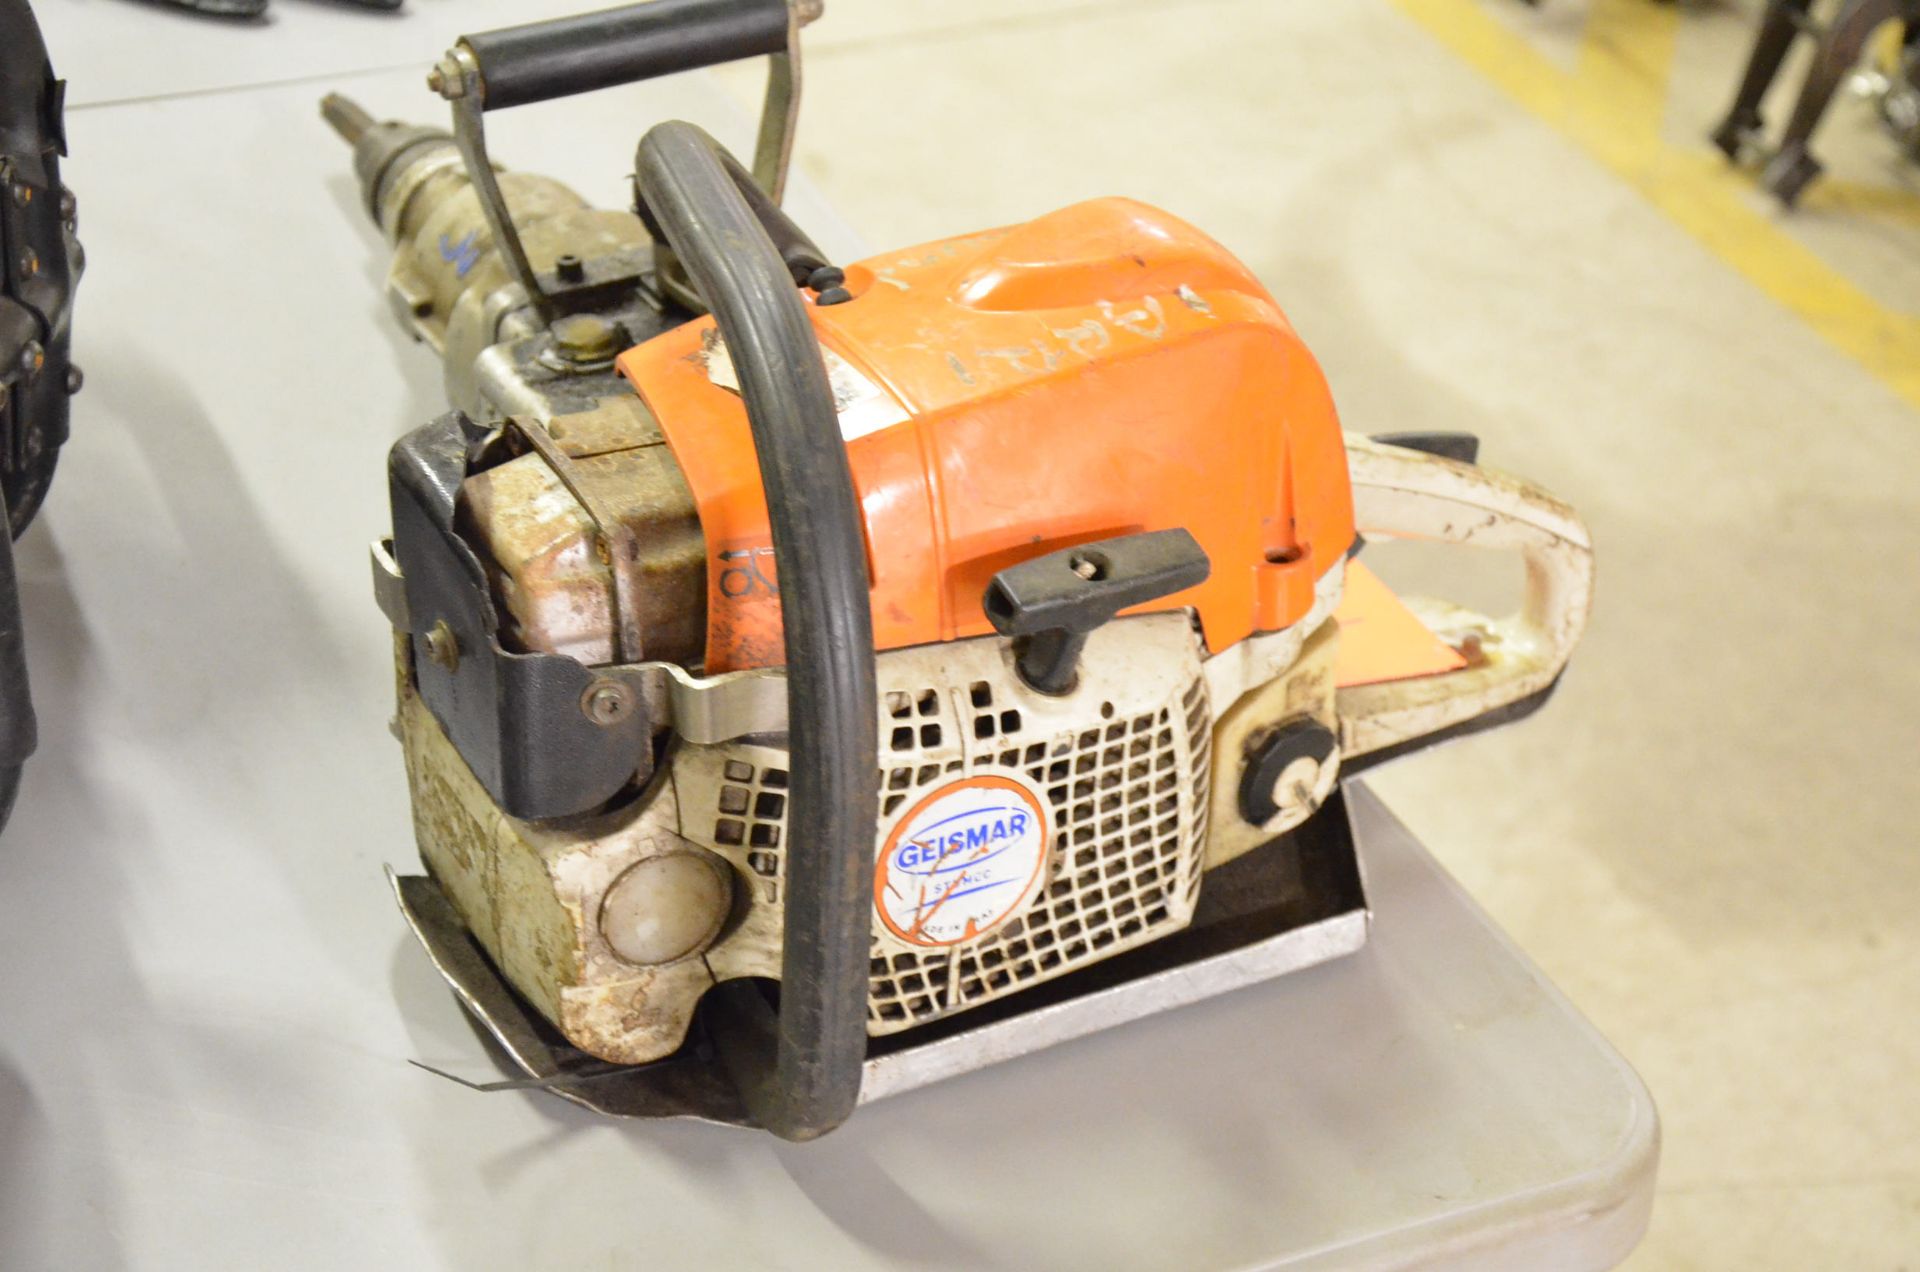 GEISMAR STIHL GAS POWERED IMPACT DRIVER, S/N N/A (LOCATED AT 169A S SERVICE RD, GRIMSBY, ON, L3M - Image 3 of 4